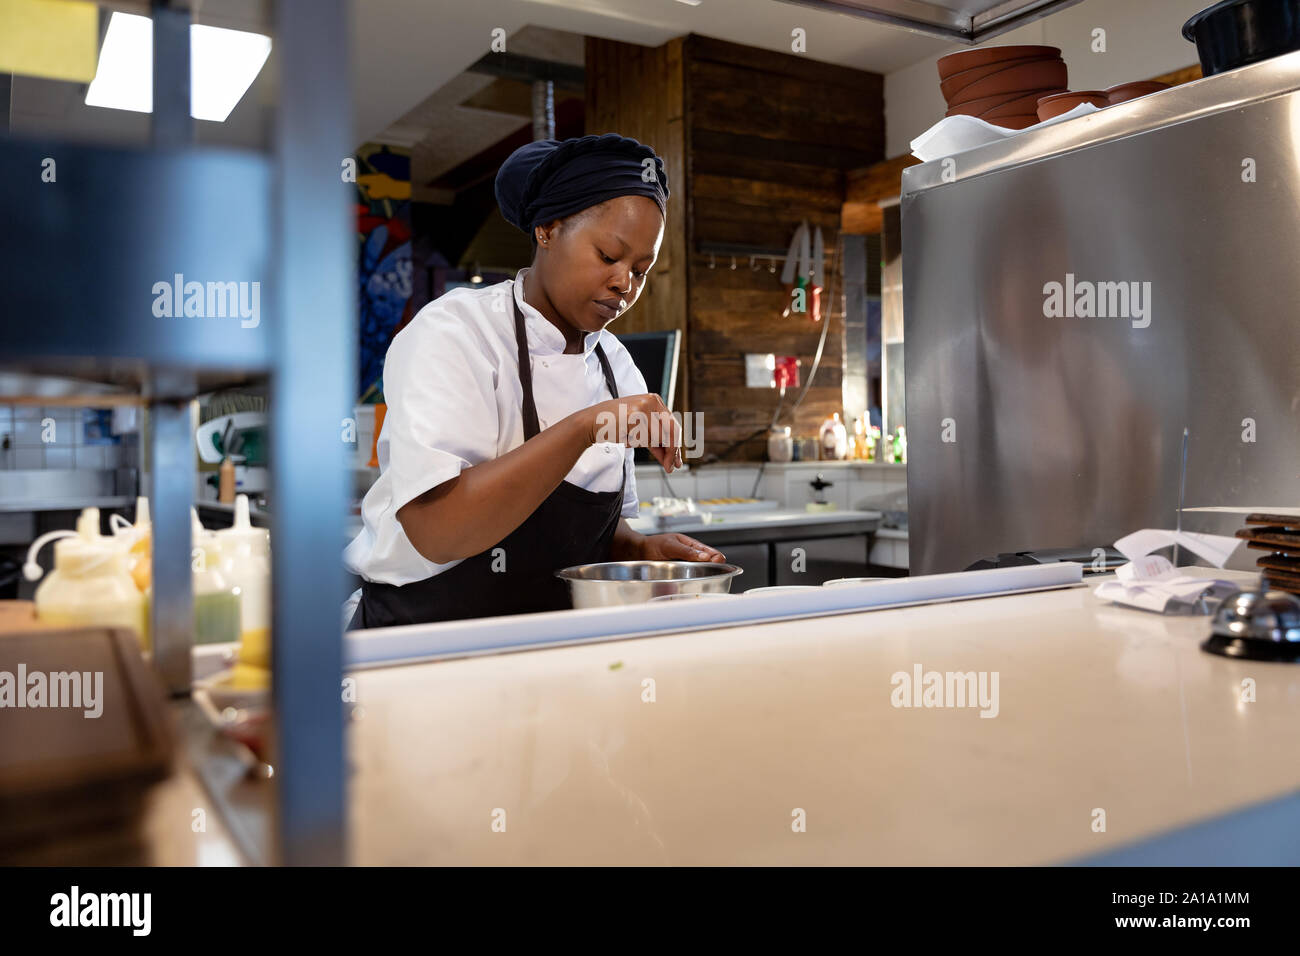 Woman cooking in restaurant kitchen Banque D'Images